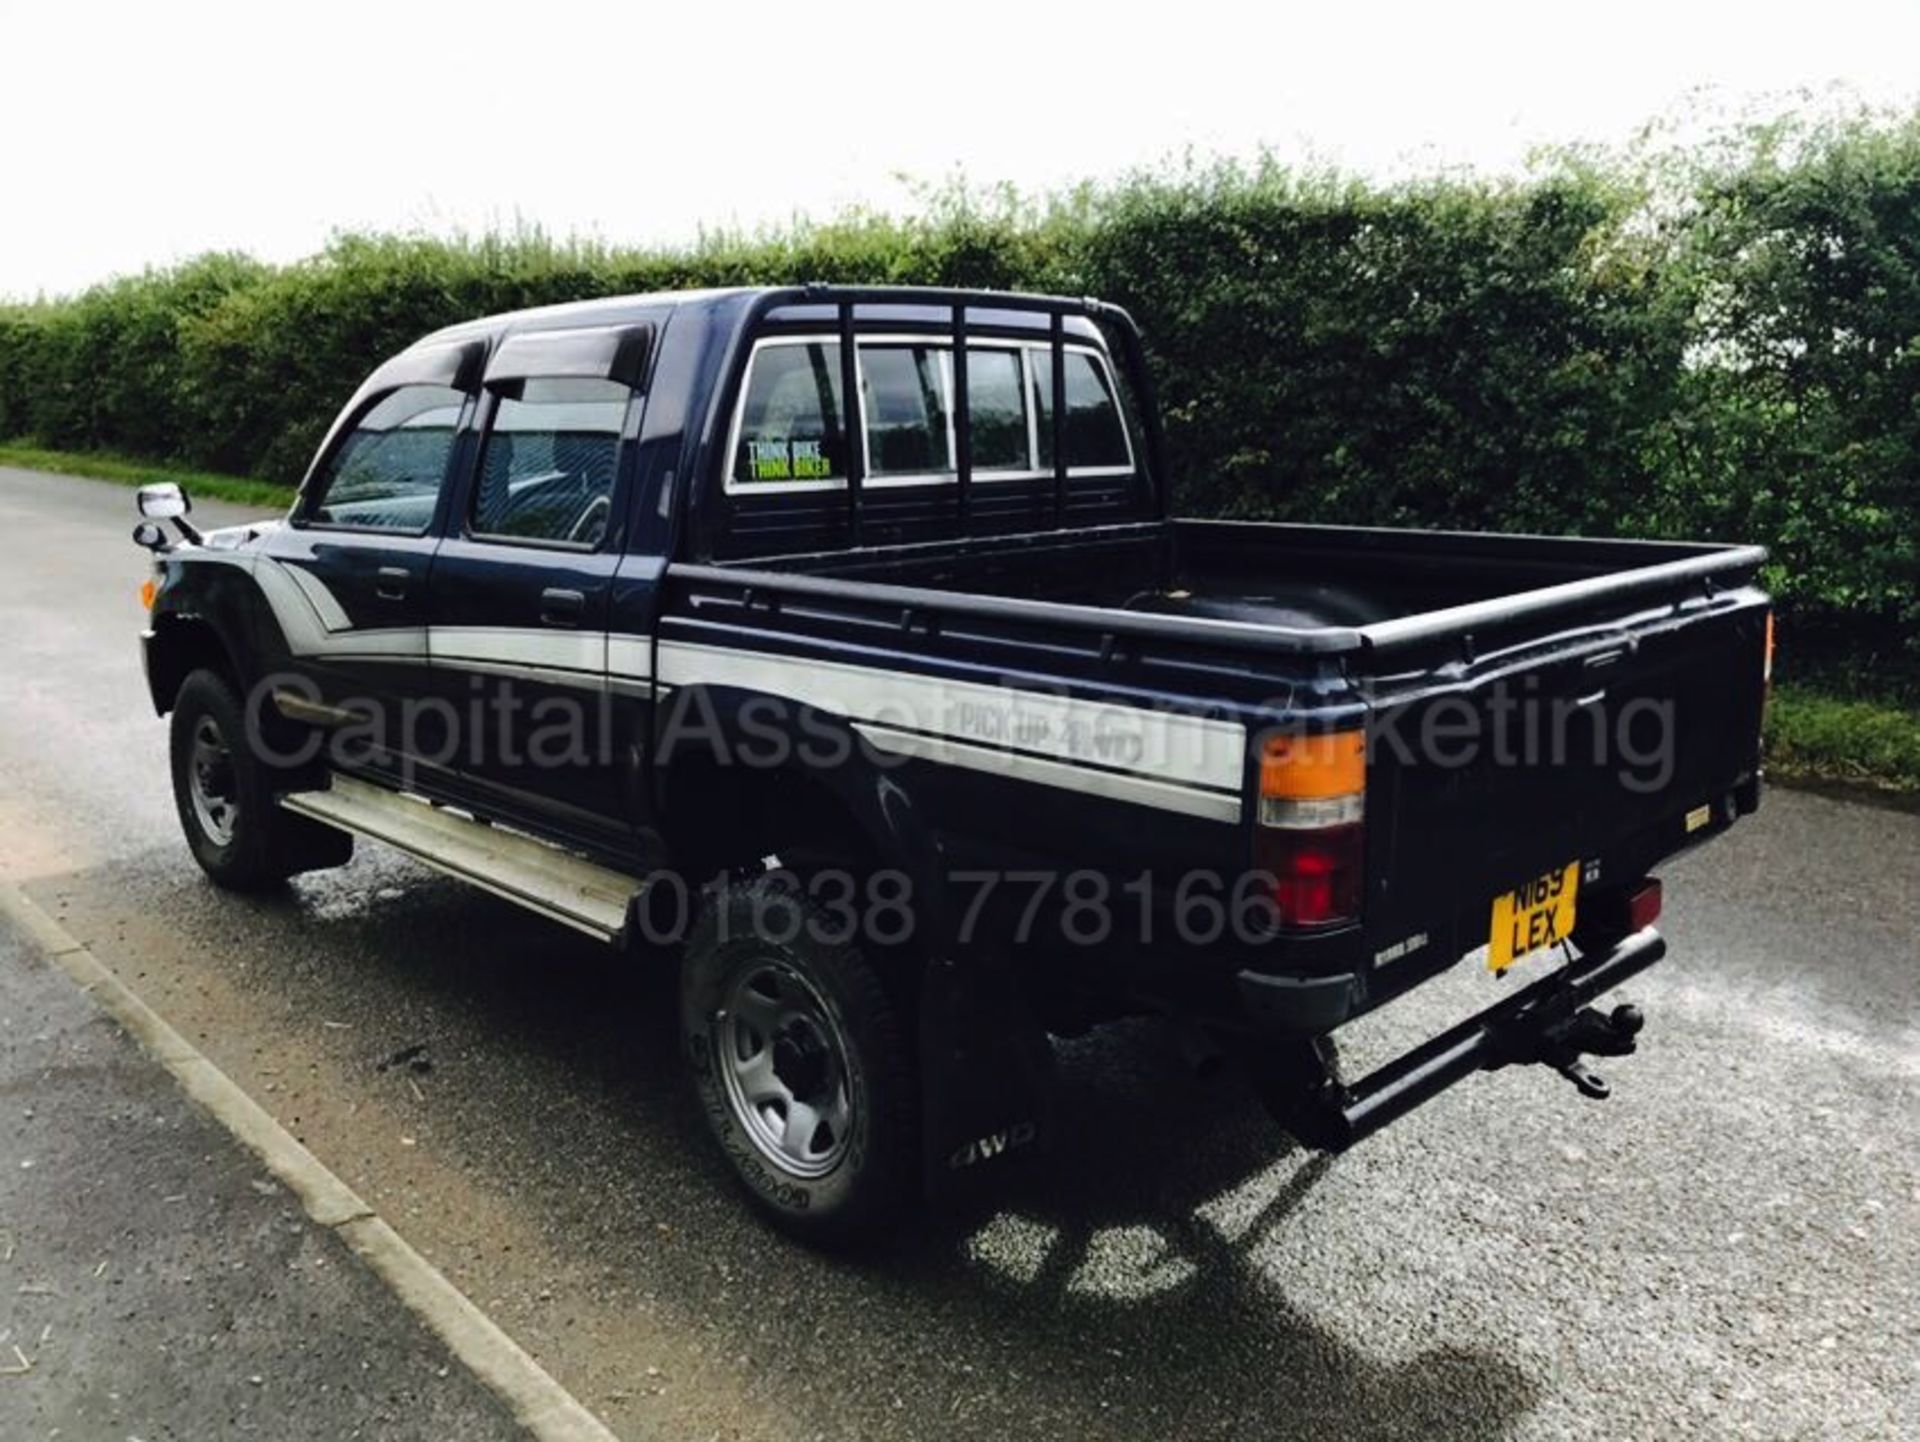 (On Sale) TOYOTA HILUX 'DOUBLE CAB' PICK-UP (1996 - N REG) 'DIESEL - 5 SPEED' **AIR CON** (NO VAT) - Image 5 of 15